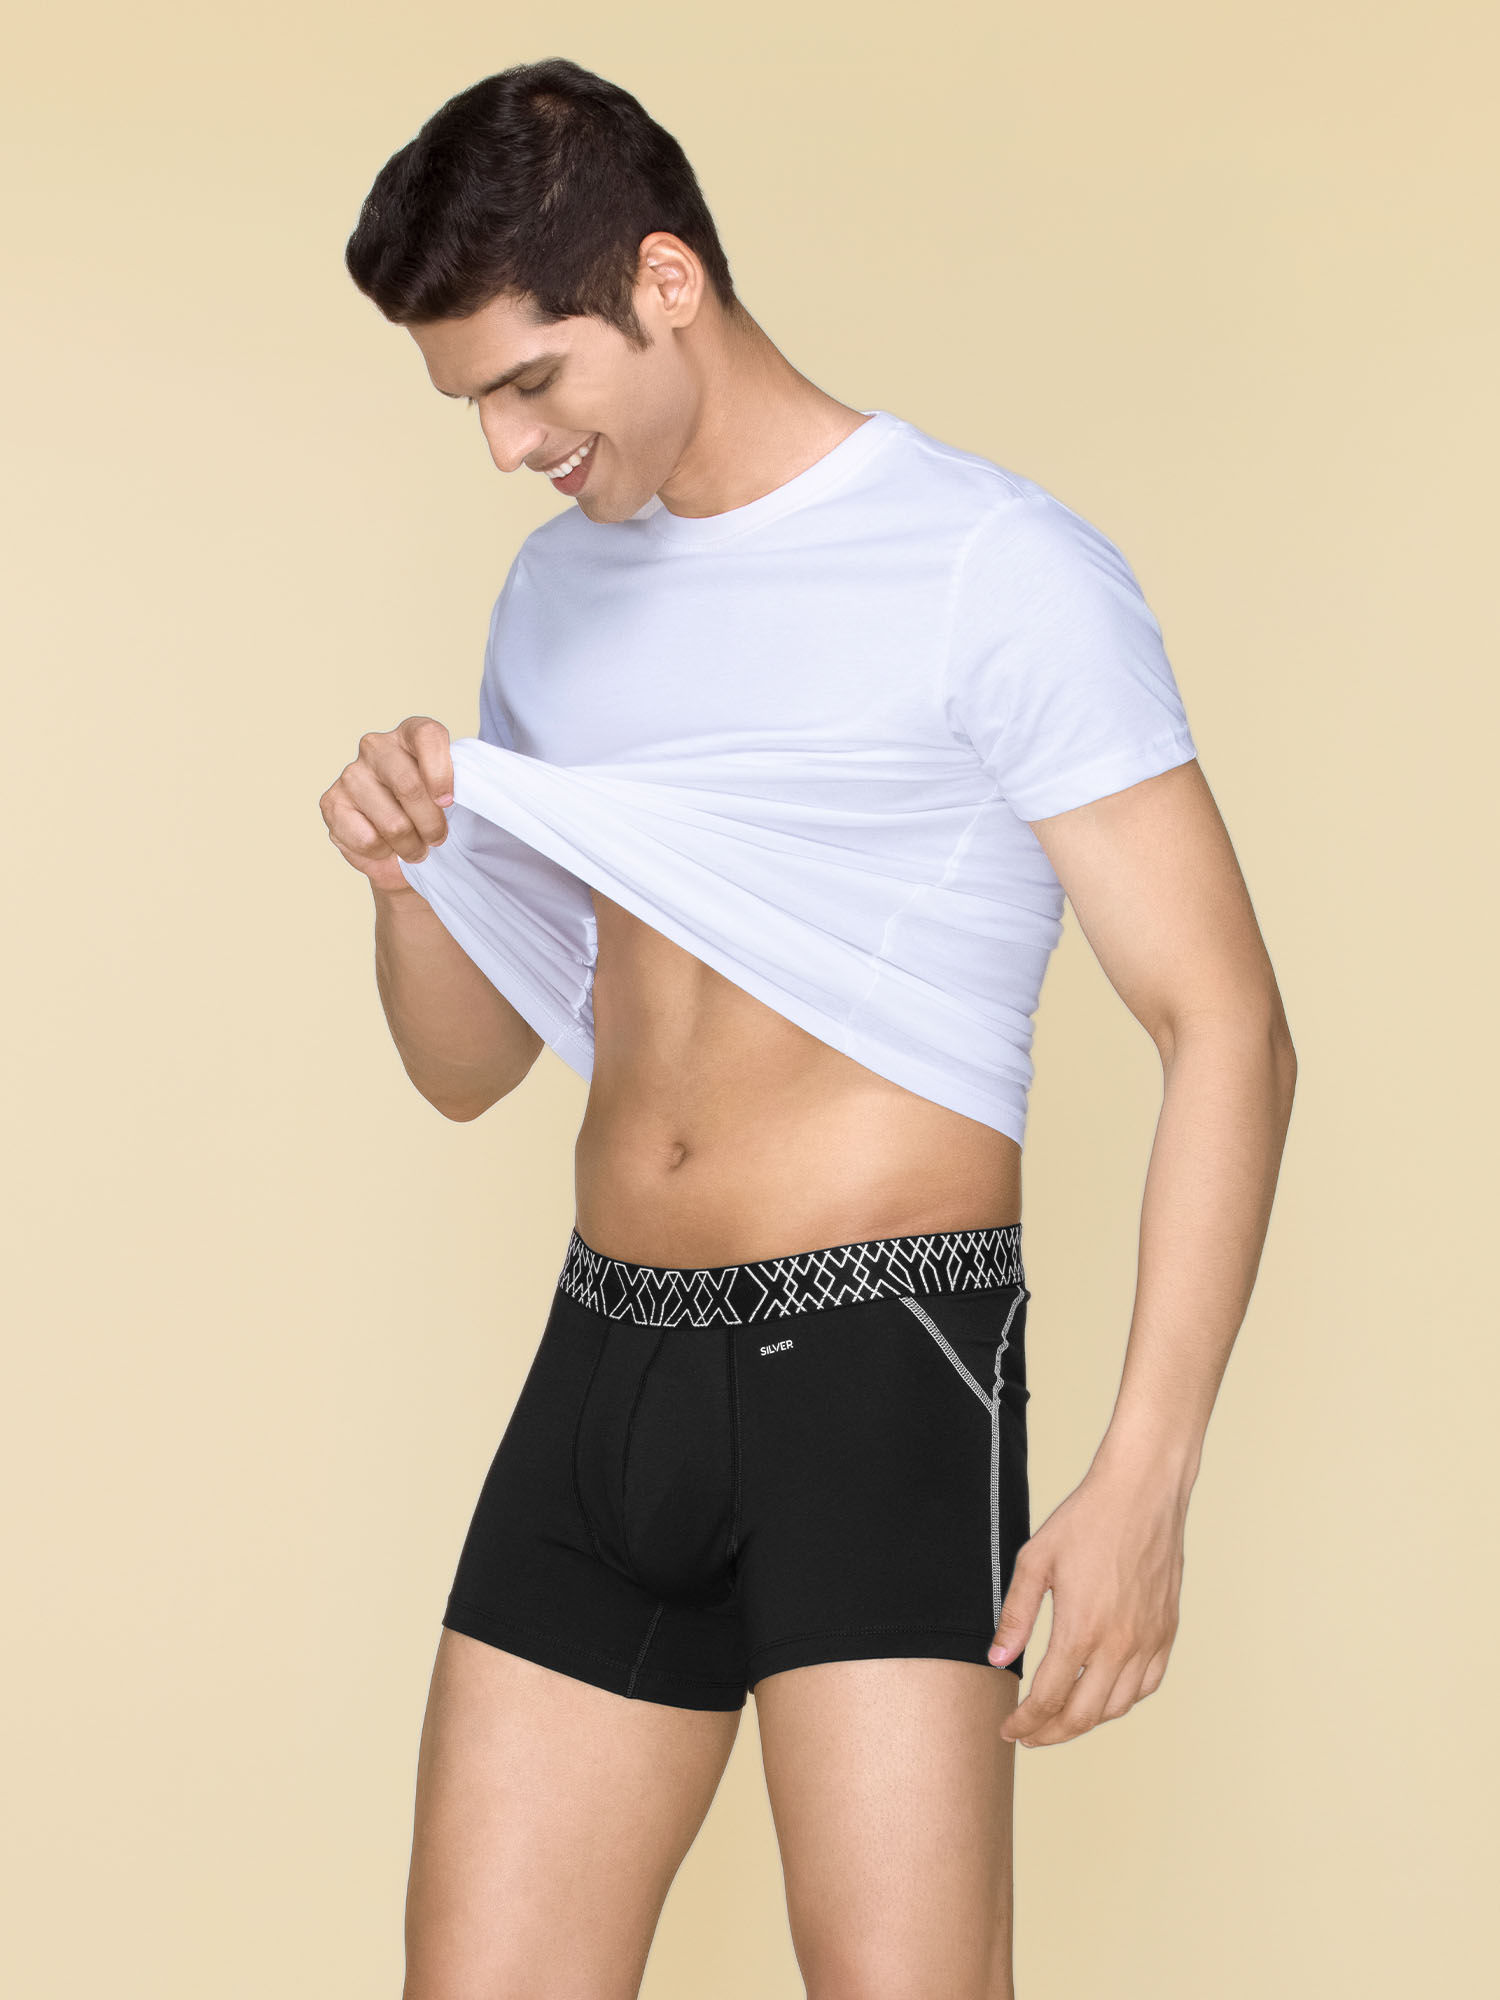 Buy XYXX Sprint Super Combed Cotton Trunk Underwear for Mens